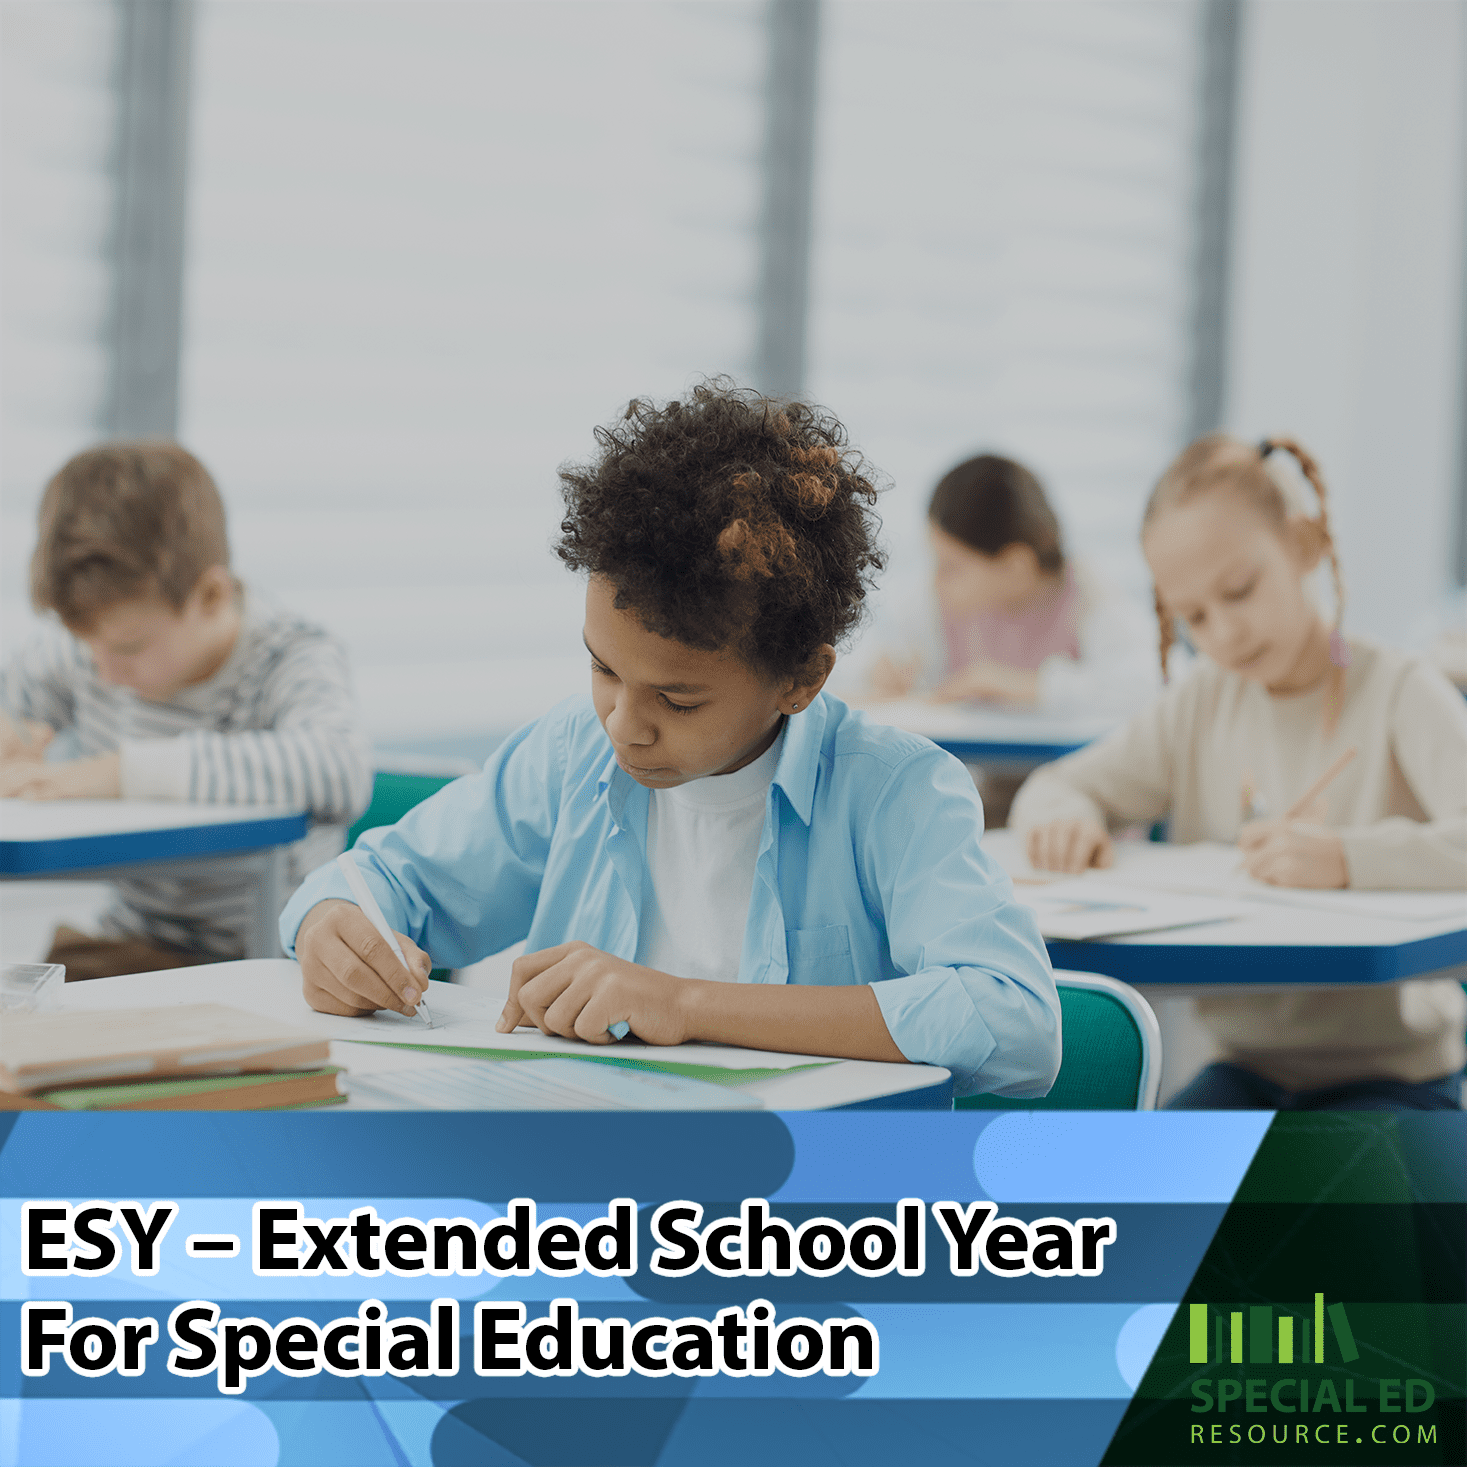 Extended School Year For Special Education